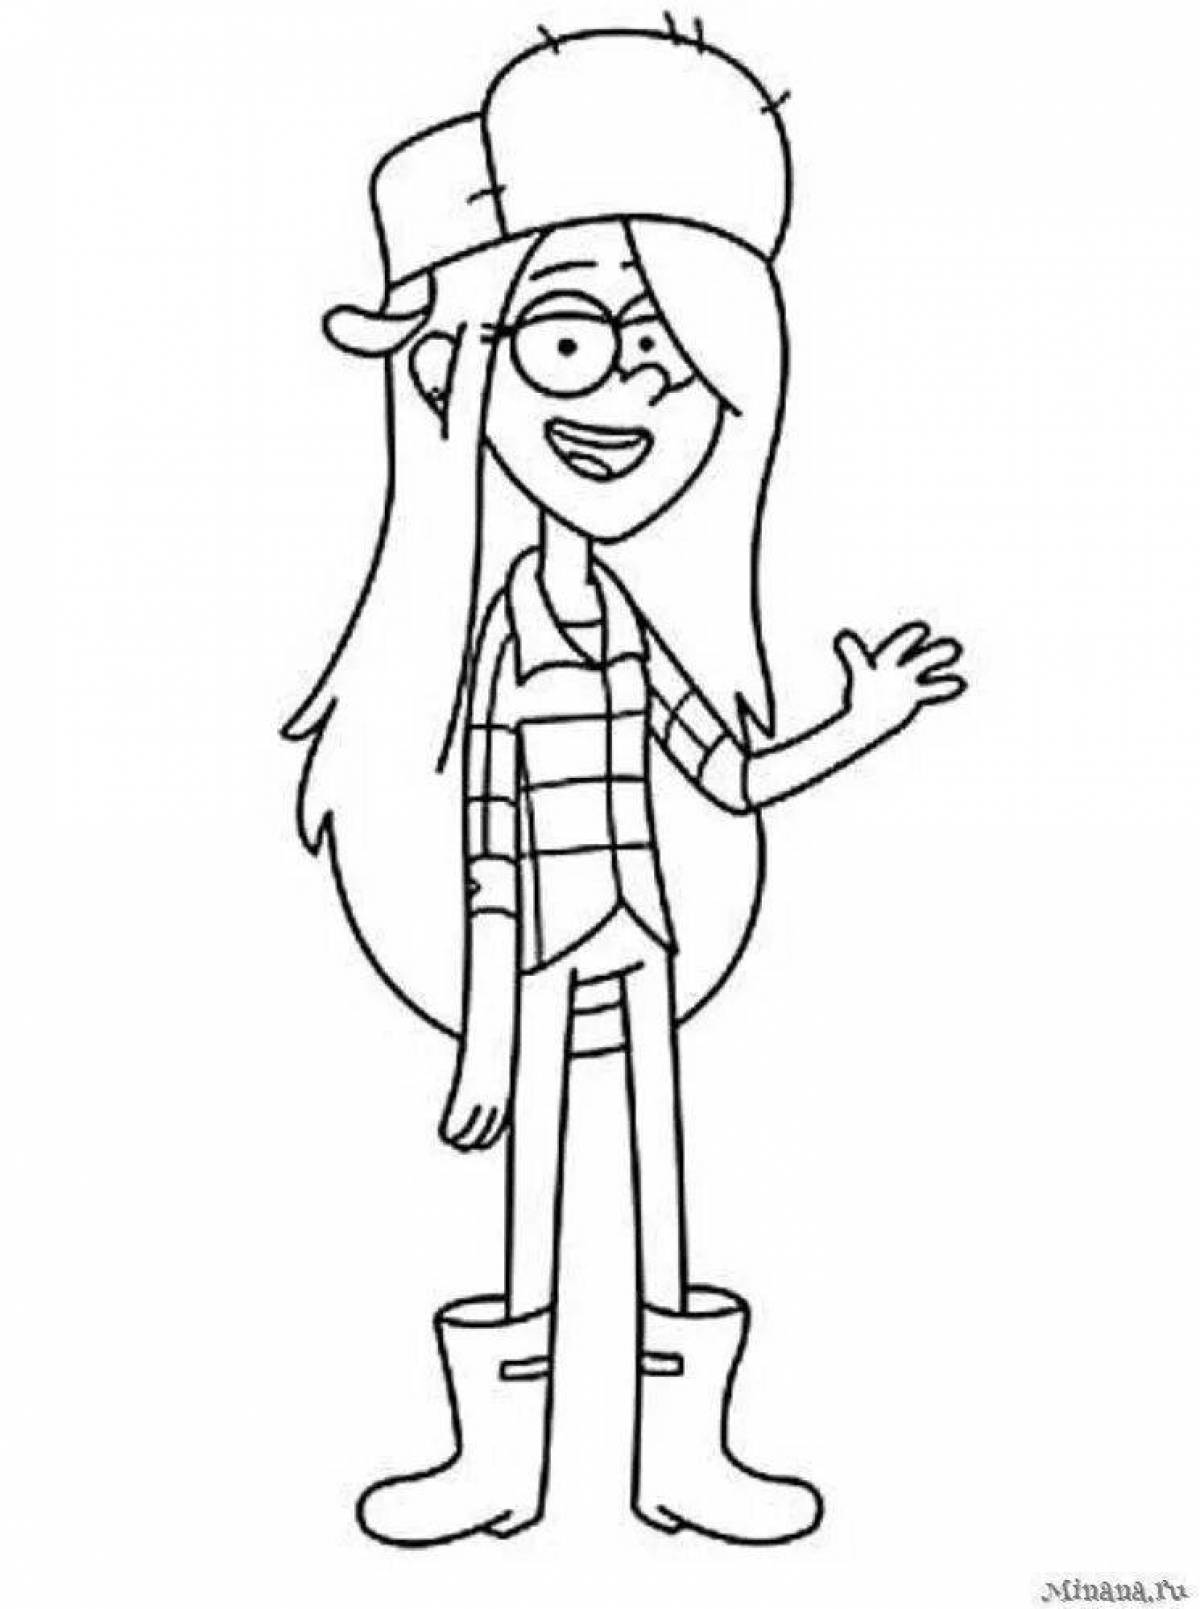 Coloring page dazzling wendy